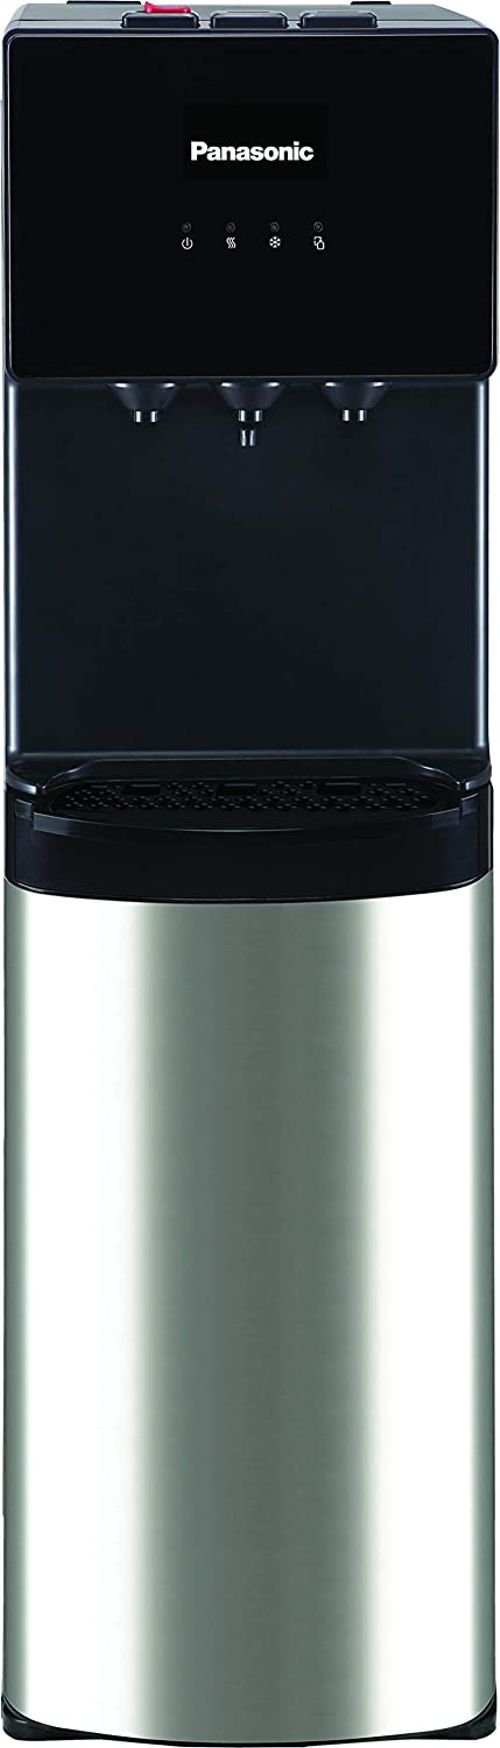 Panasonic Water Dispenser, Bottom Loading, Three Taps, Cold Hot and Normal, Stainless Steel, Black